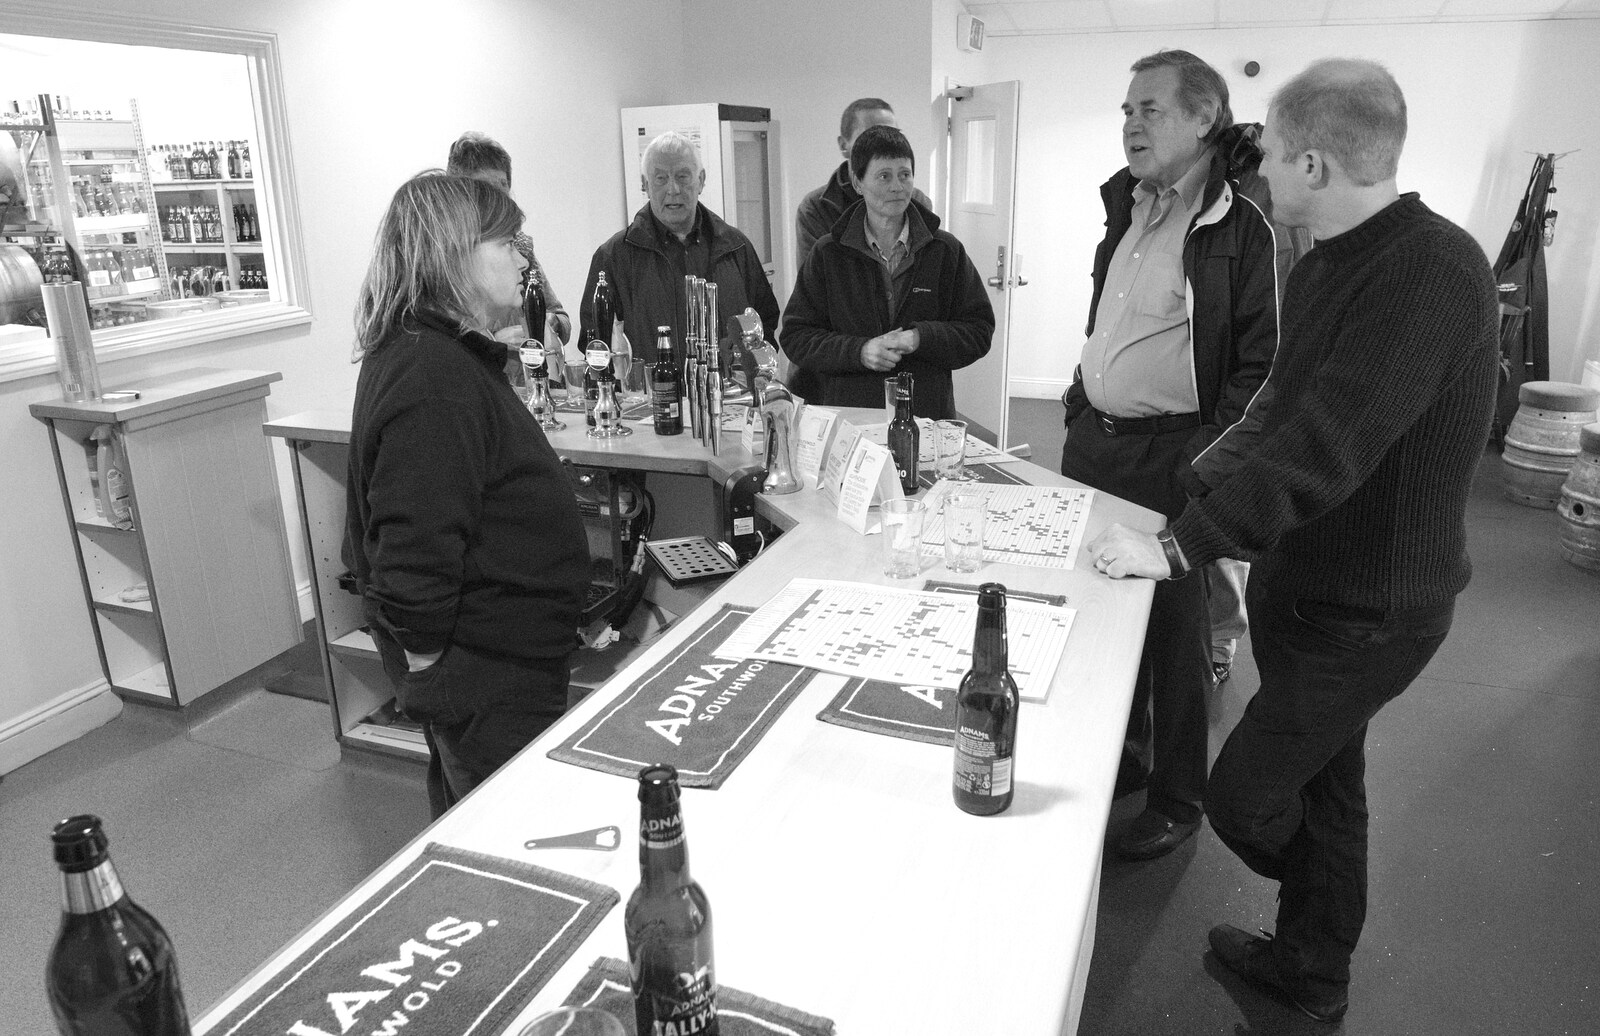 Alan talks about the trade from Apple's Adnams Brewery Birthday Tour, Southwold, Suffolk - 29th November 2012